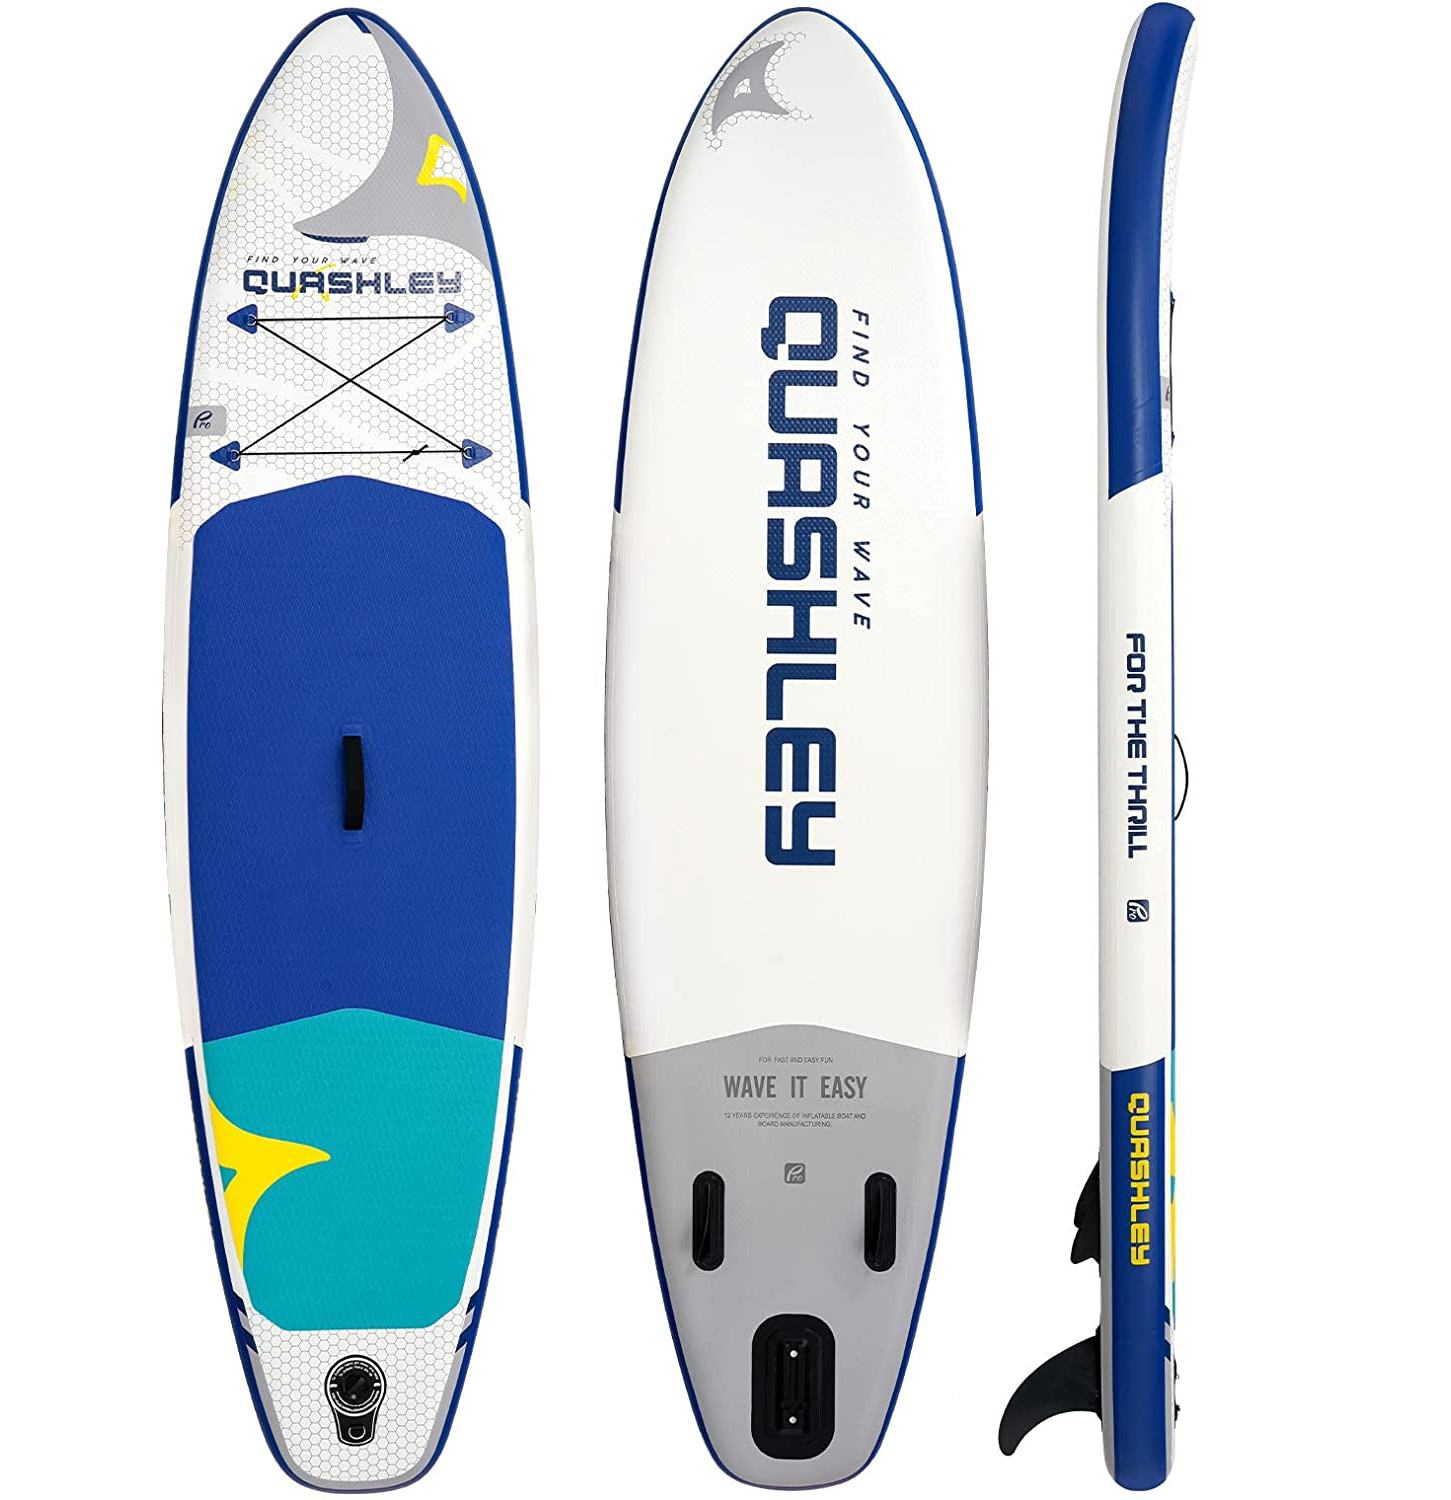 Quashley Inflatable Stand Up Paddle Board Surfboard with Premium